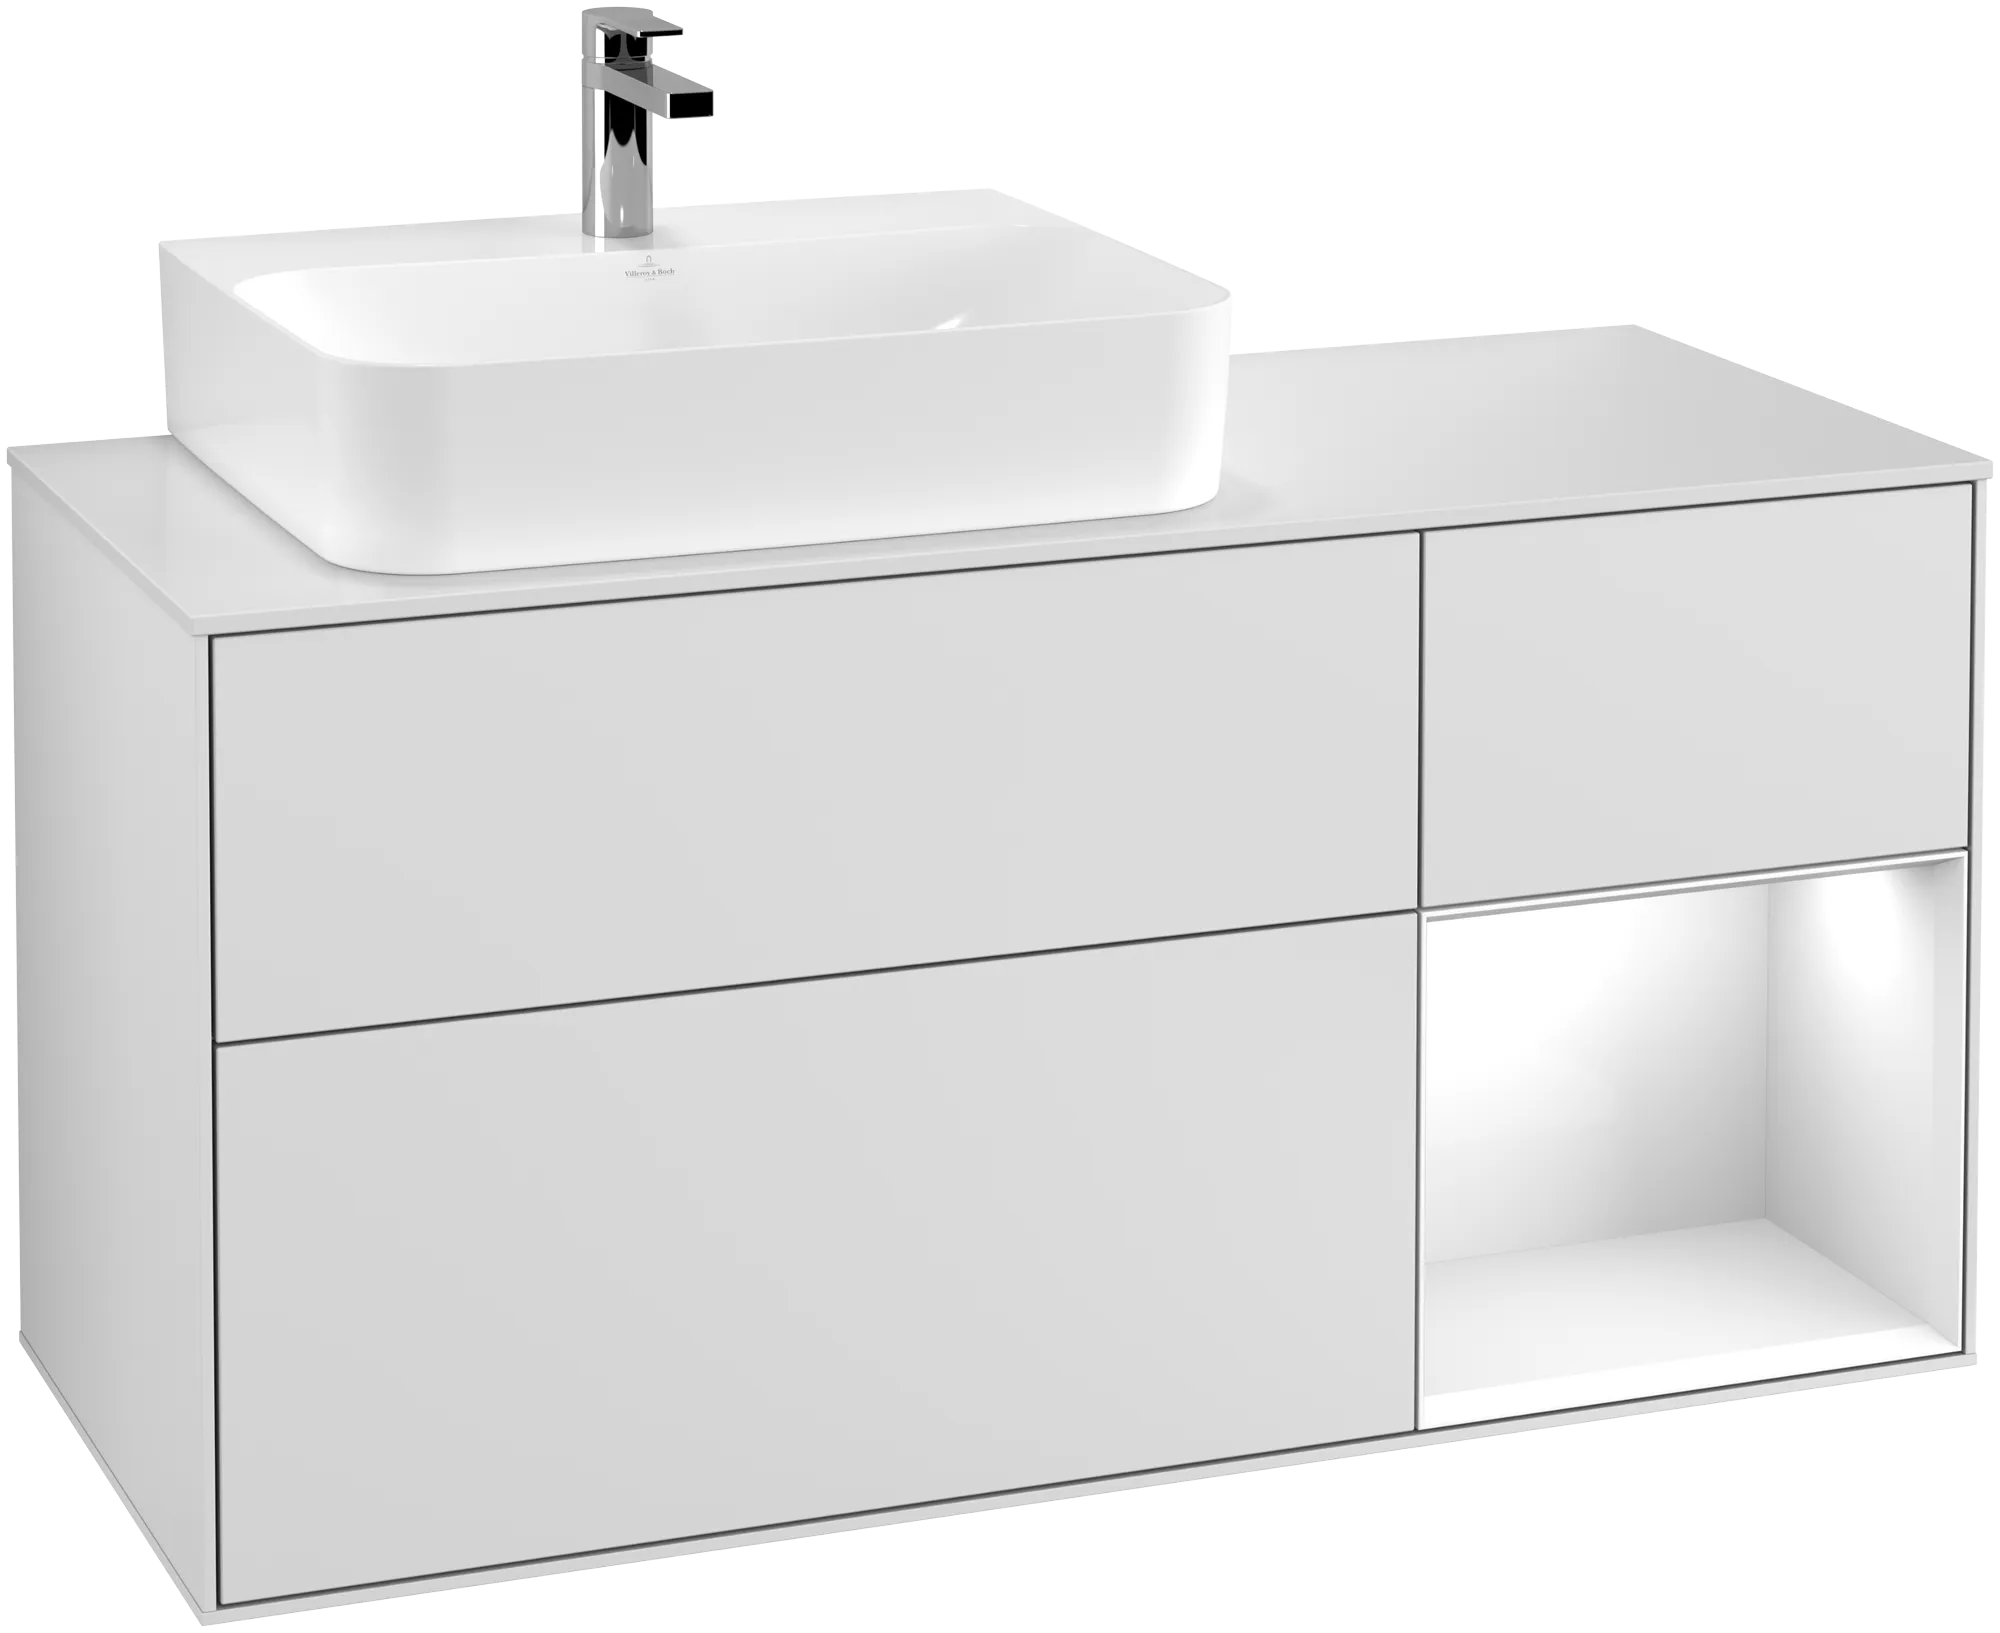 Picture of VILLEROY BOCH Finion Vanity unit, with lighting, 3 pull-out compartments, 1200 x 603 x 501 mm, White Matt Lacquer / Glossy White Lacquer / Glass White Matt #G151GFMT